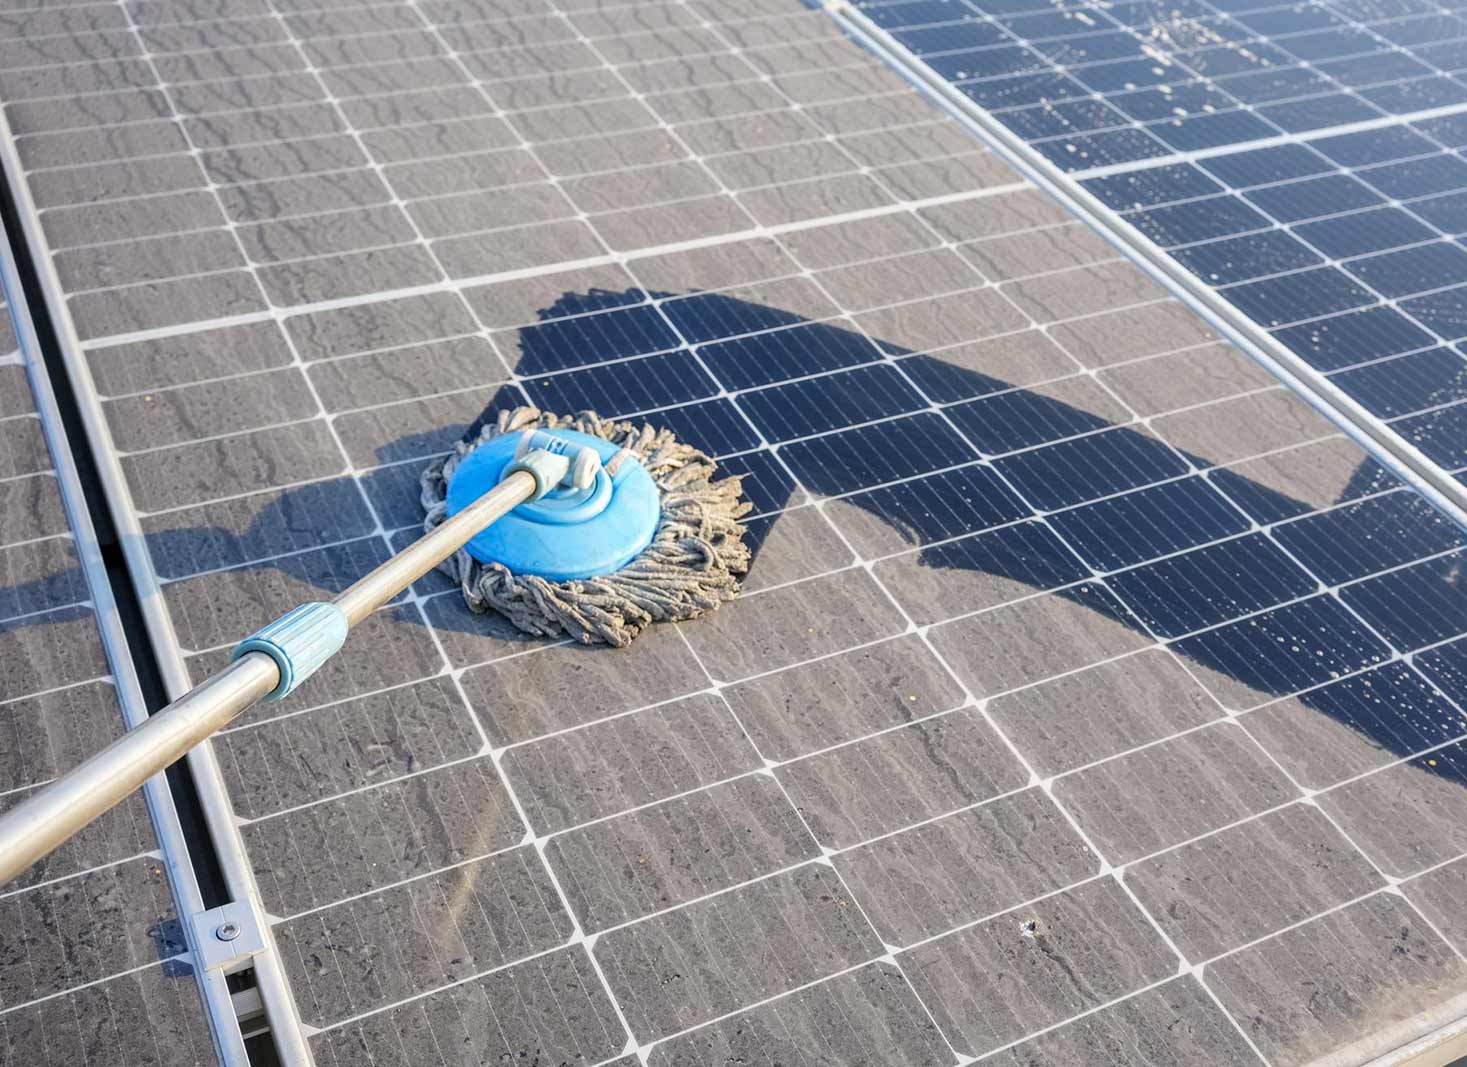 Can vinegar damage the solar panel components